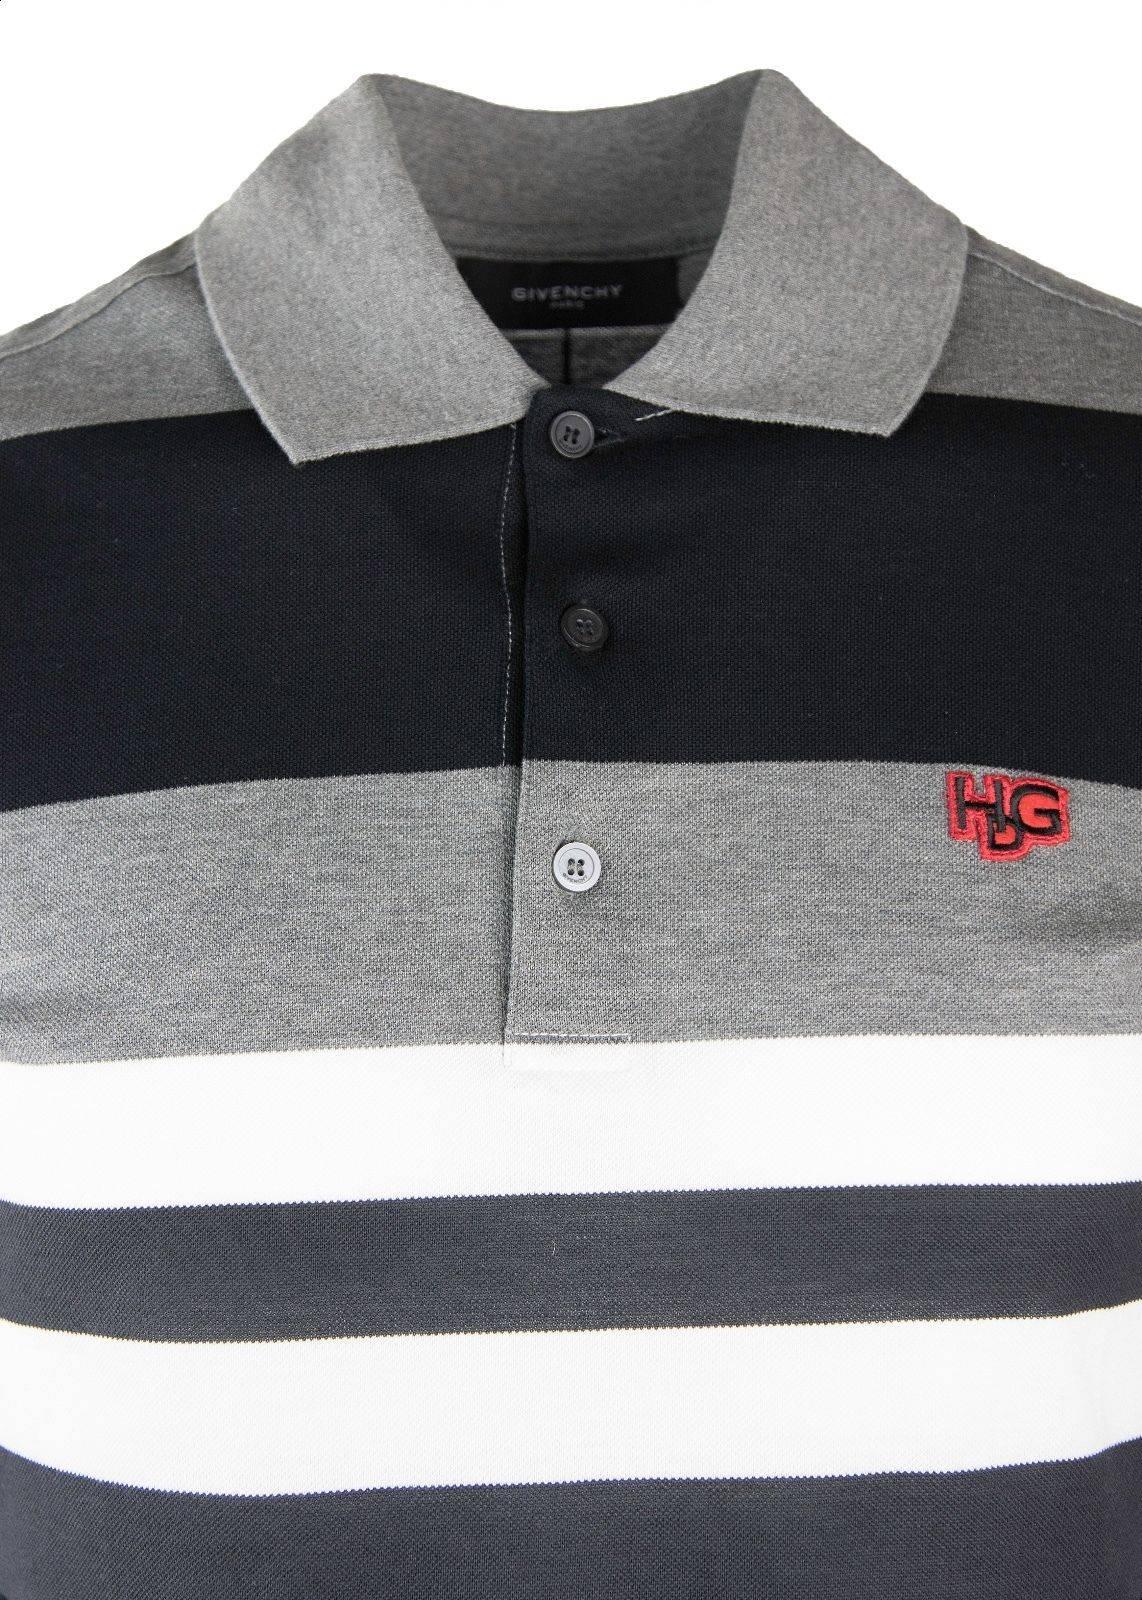 Brand New Givenchy Men's Polo
Original Tags
Retails in Stores & Online for $350
Men's Size SFits True to Size

Givenchy's polo top in a gray base color with black and white accented stripes. The top also is crafted with the Givenchy HDG Logo in Red.